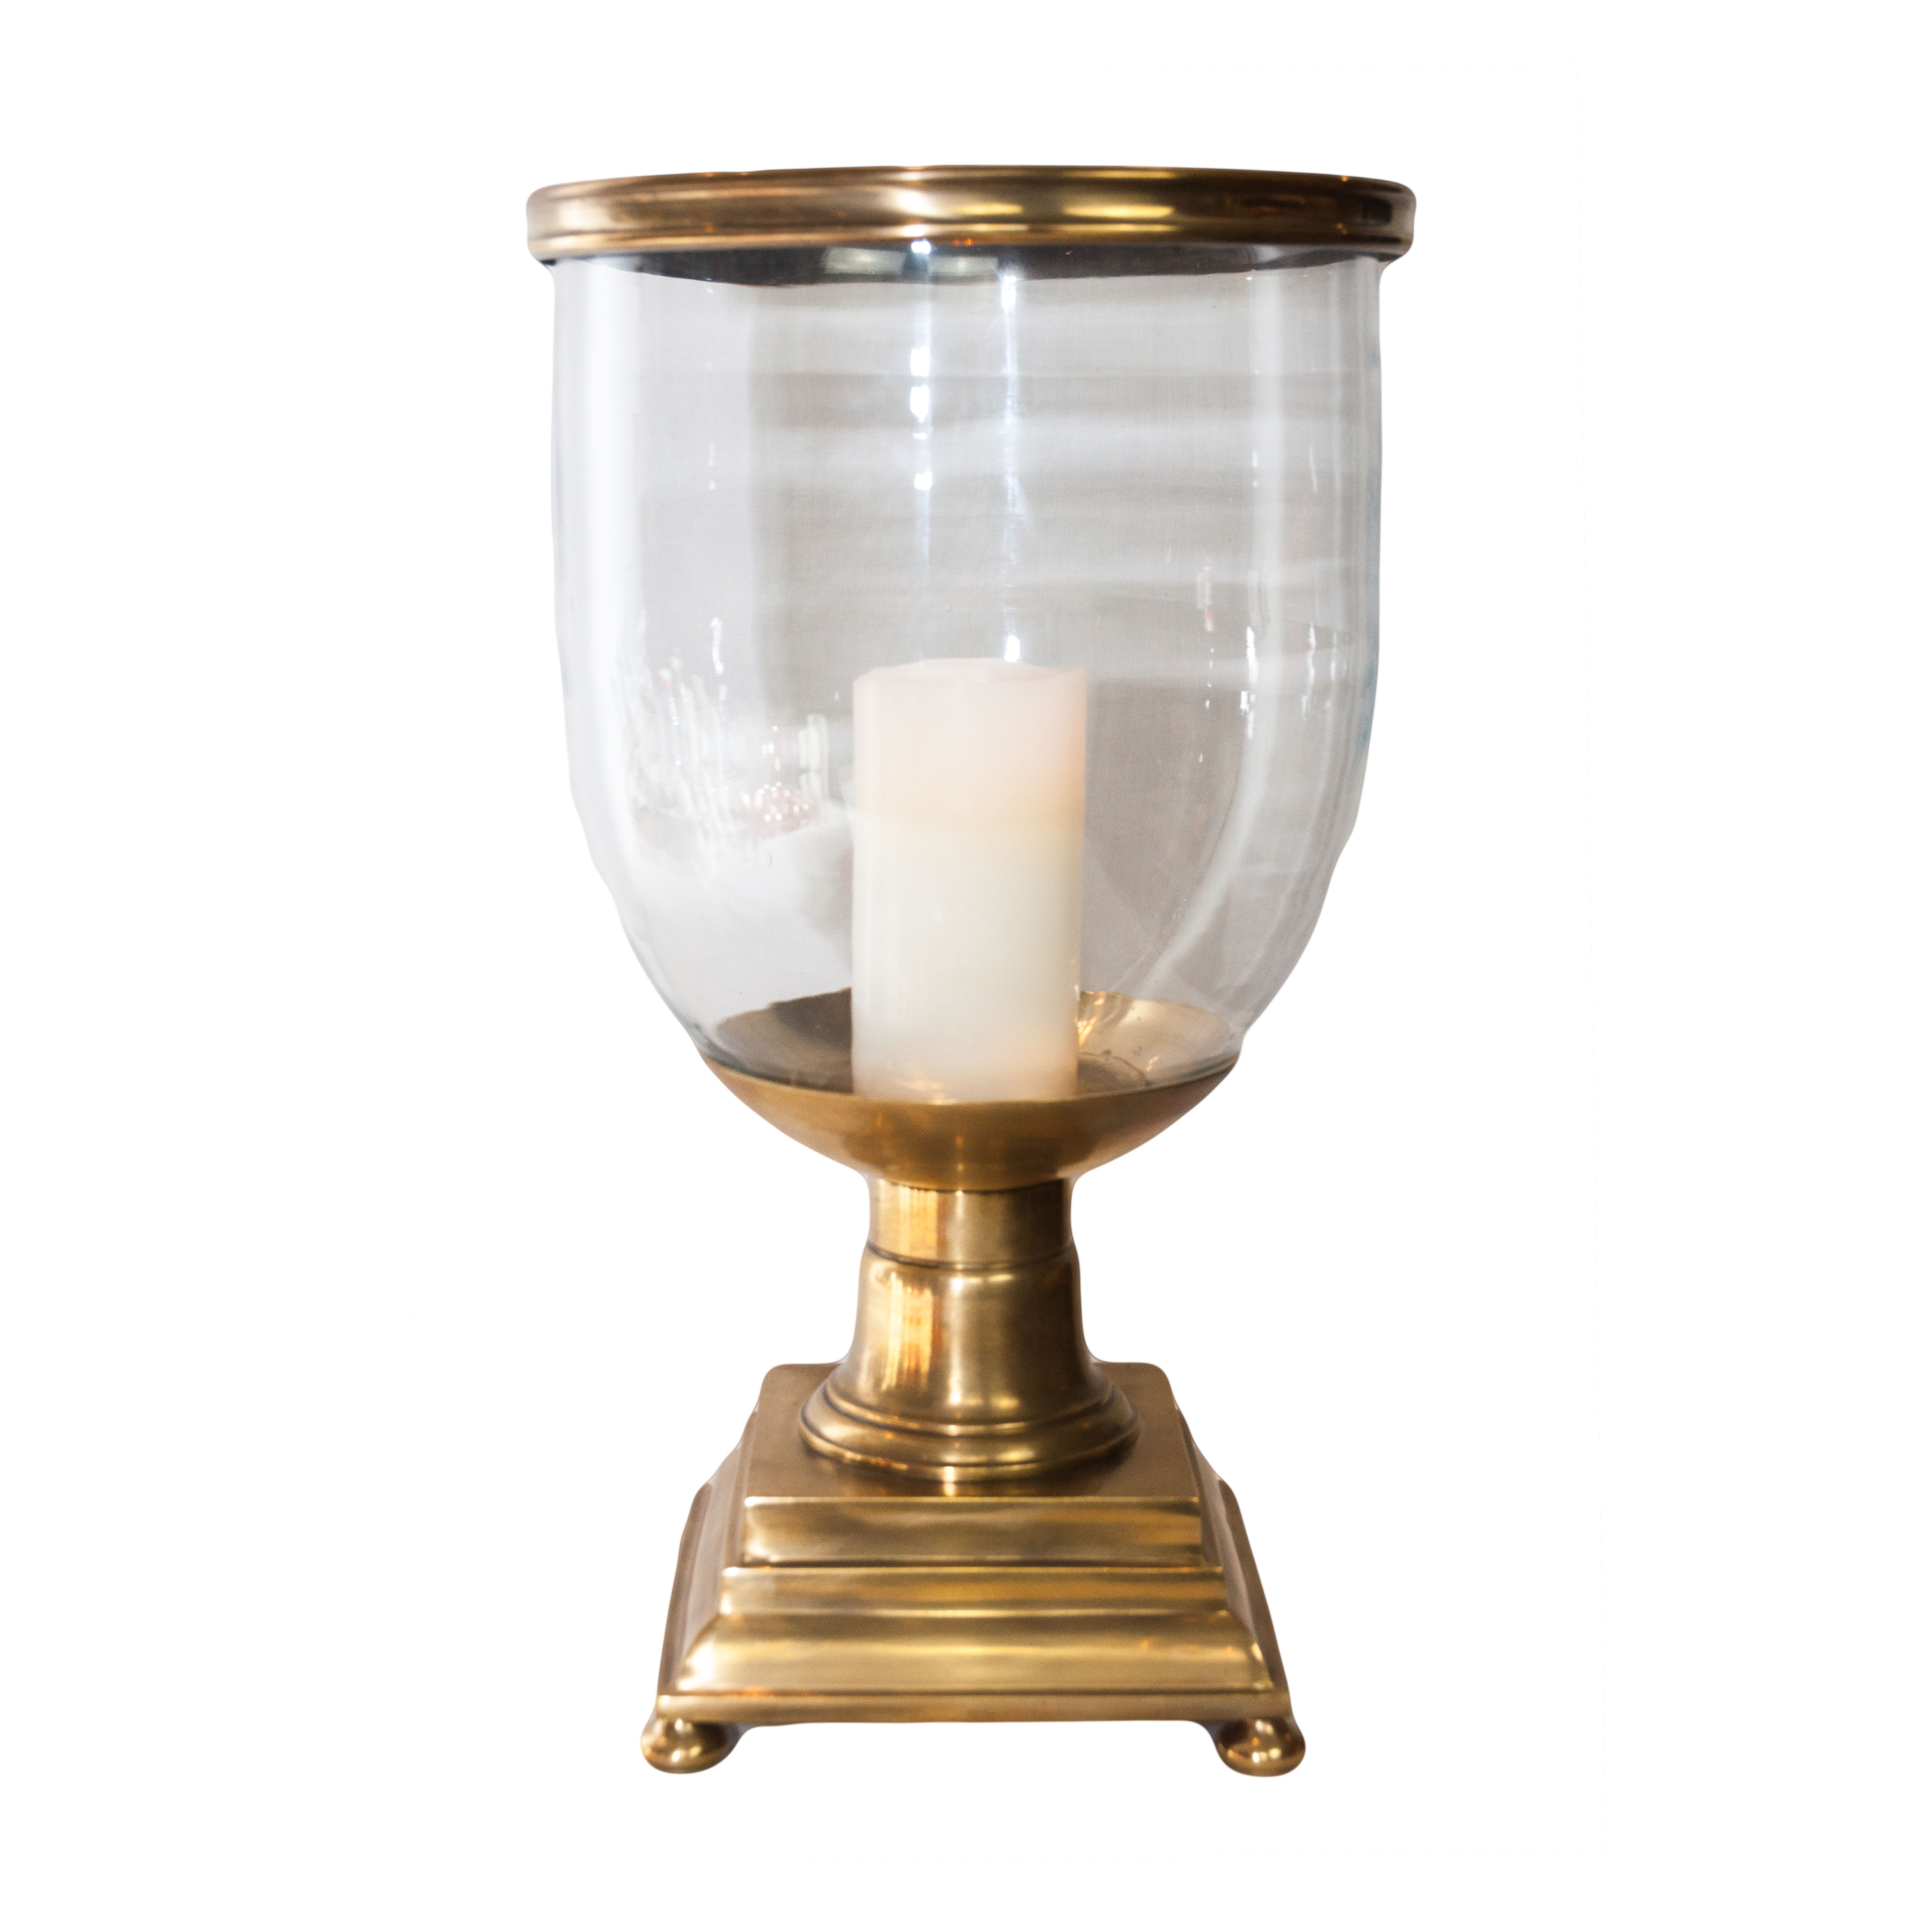 Forde Brass Hurricane Lamp On Square, Brass Hurricane Lamps Candles